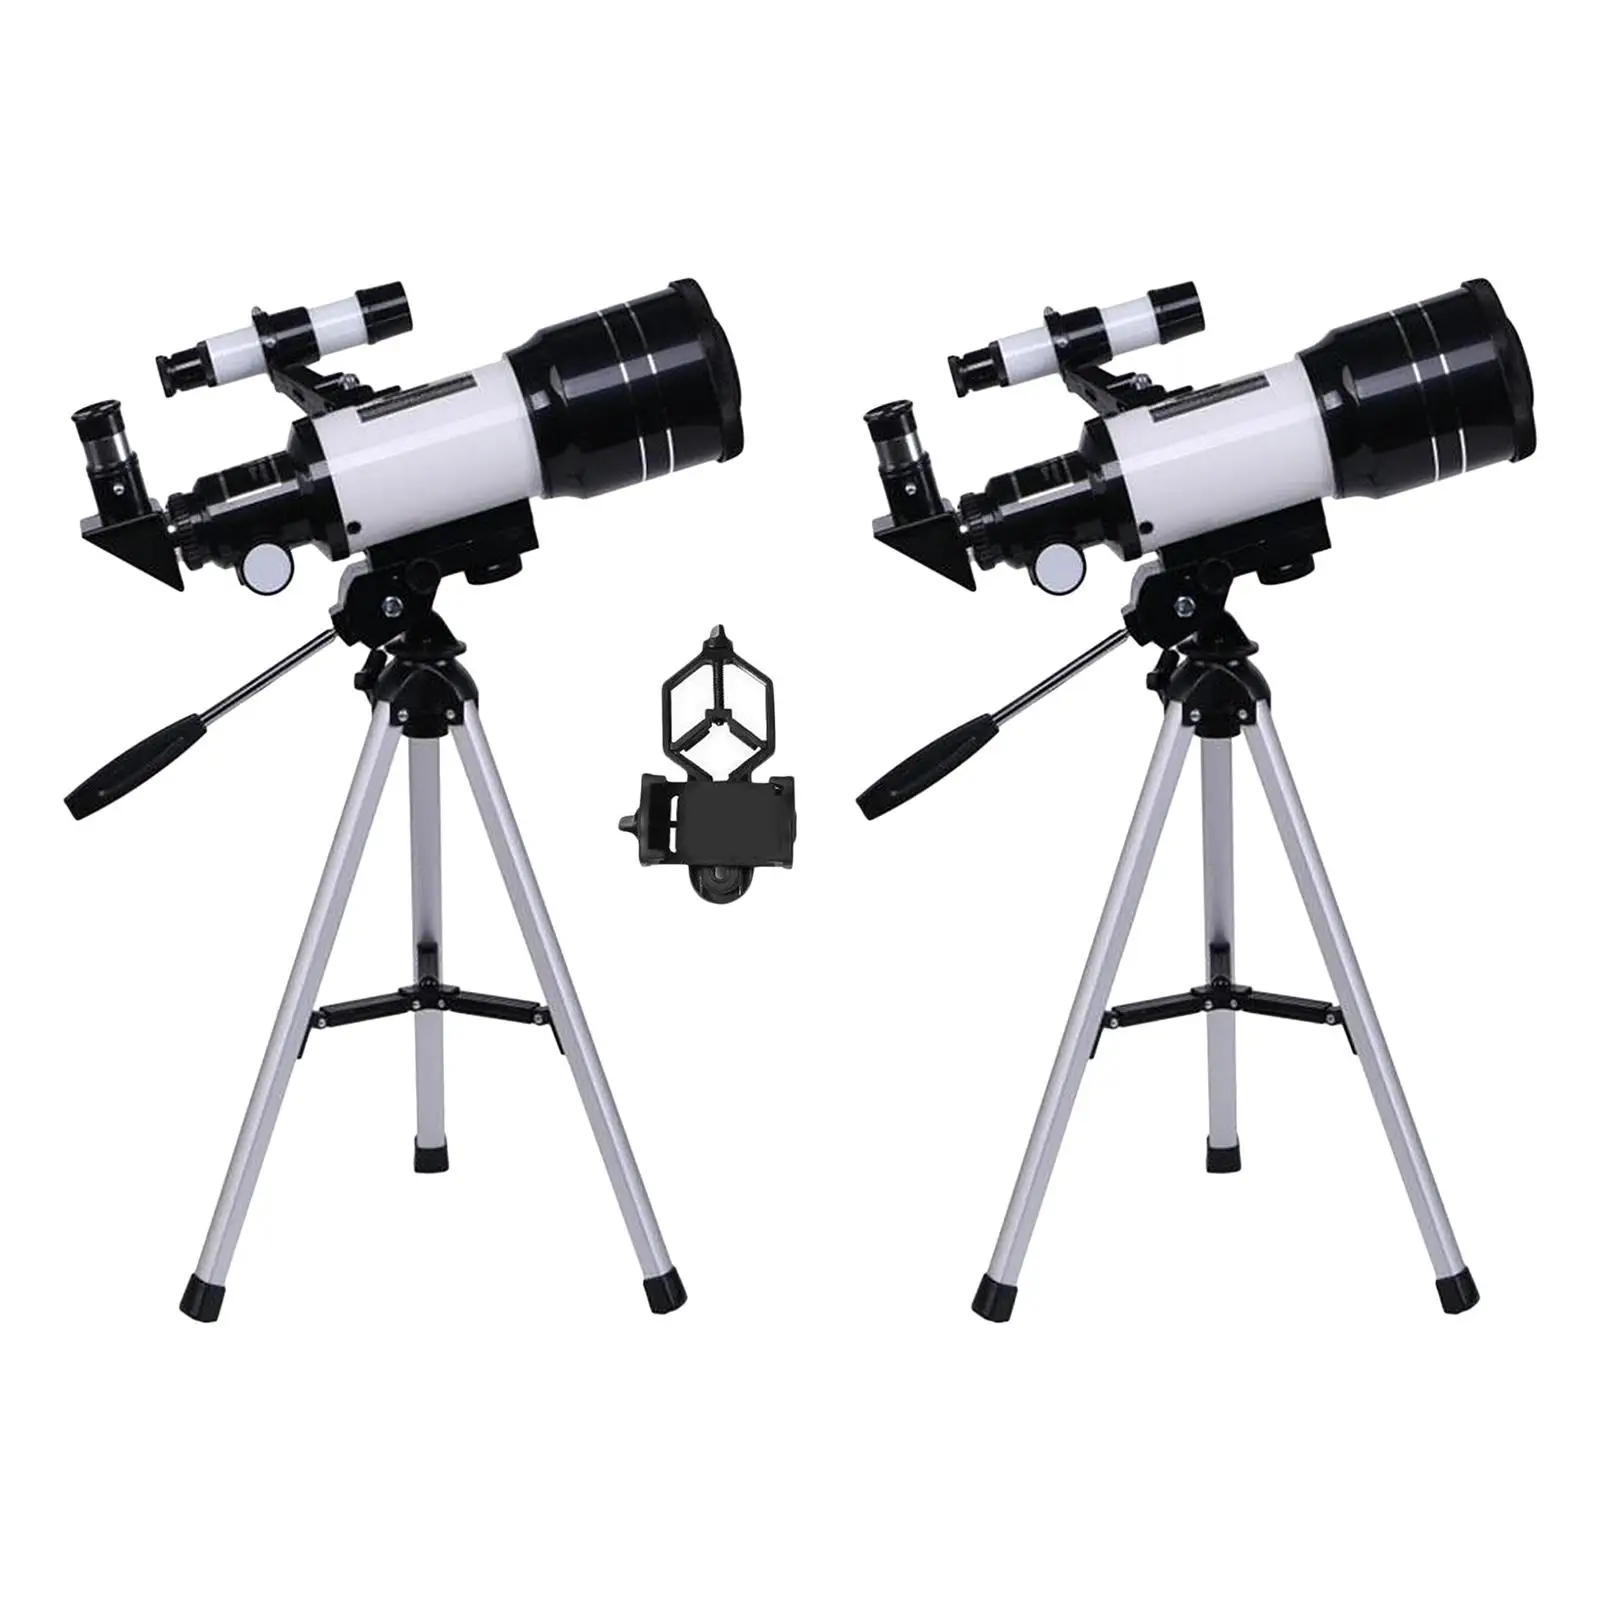 Portable 70 Astronomical Reflector Telescope Set with Tripod for Kids Beginners